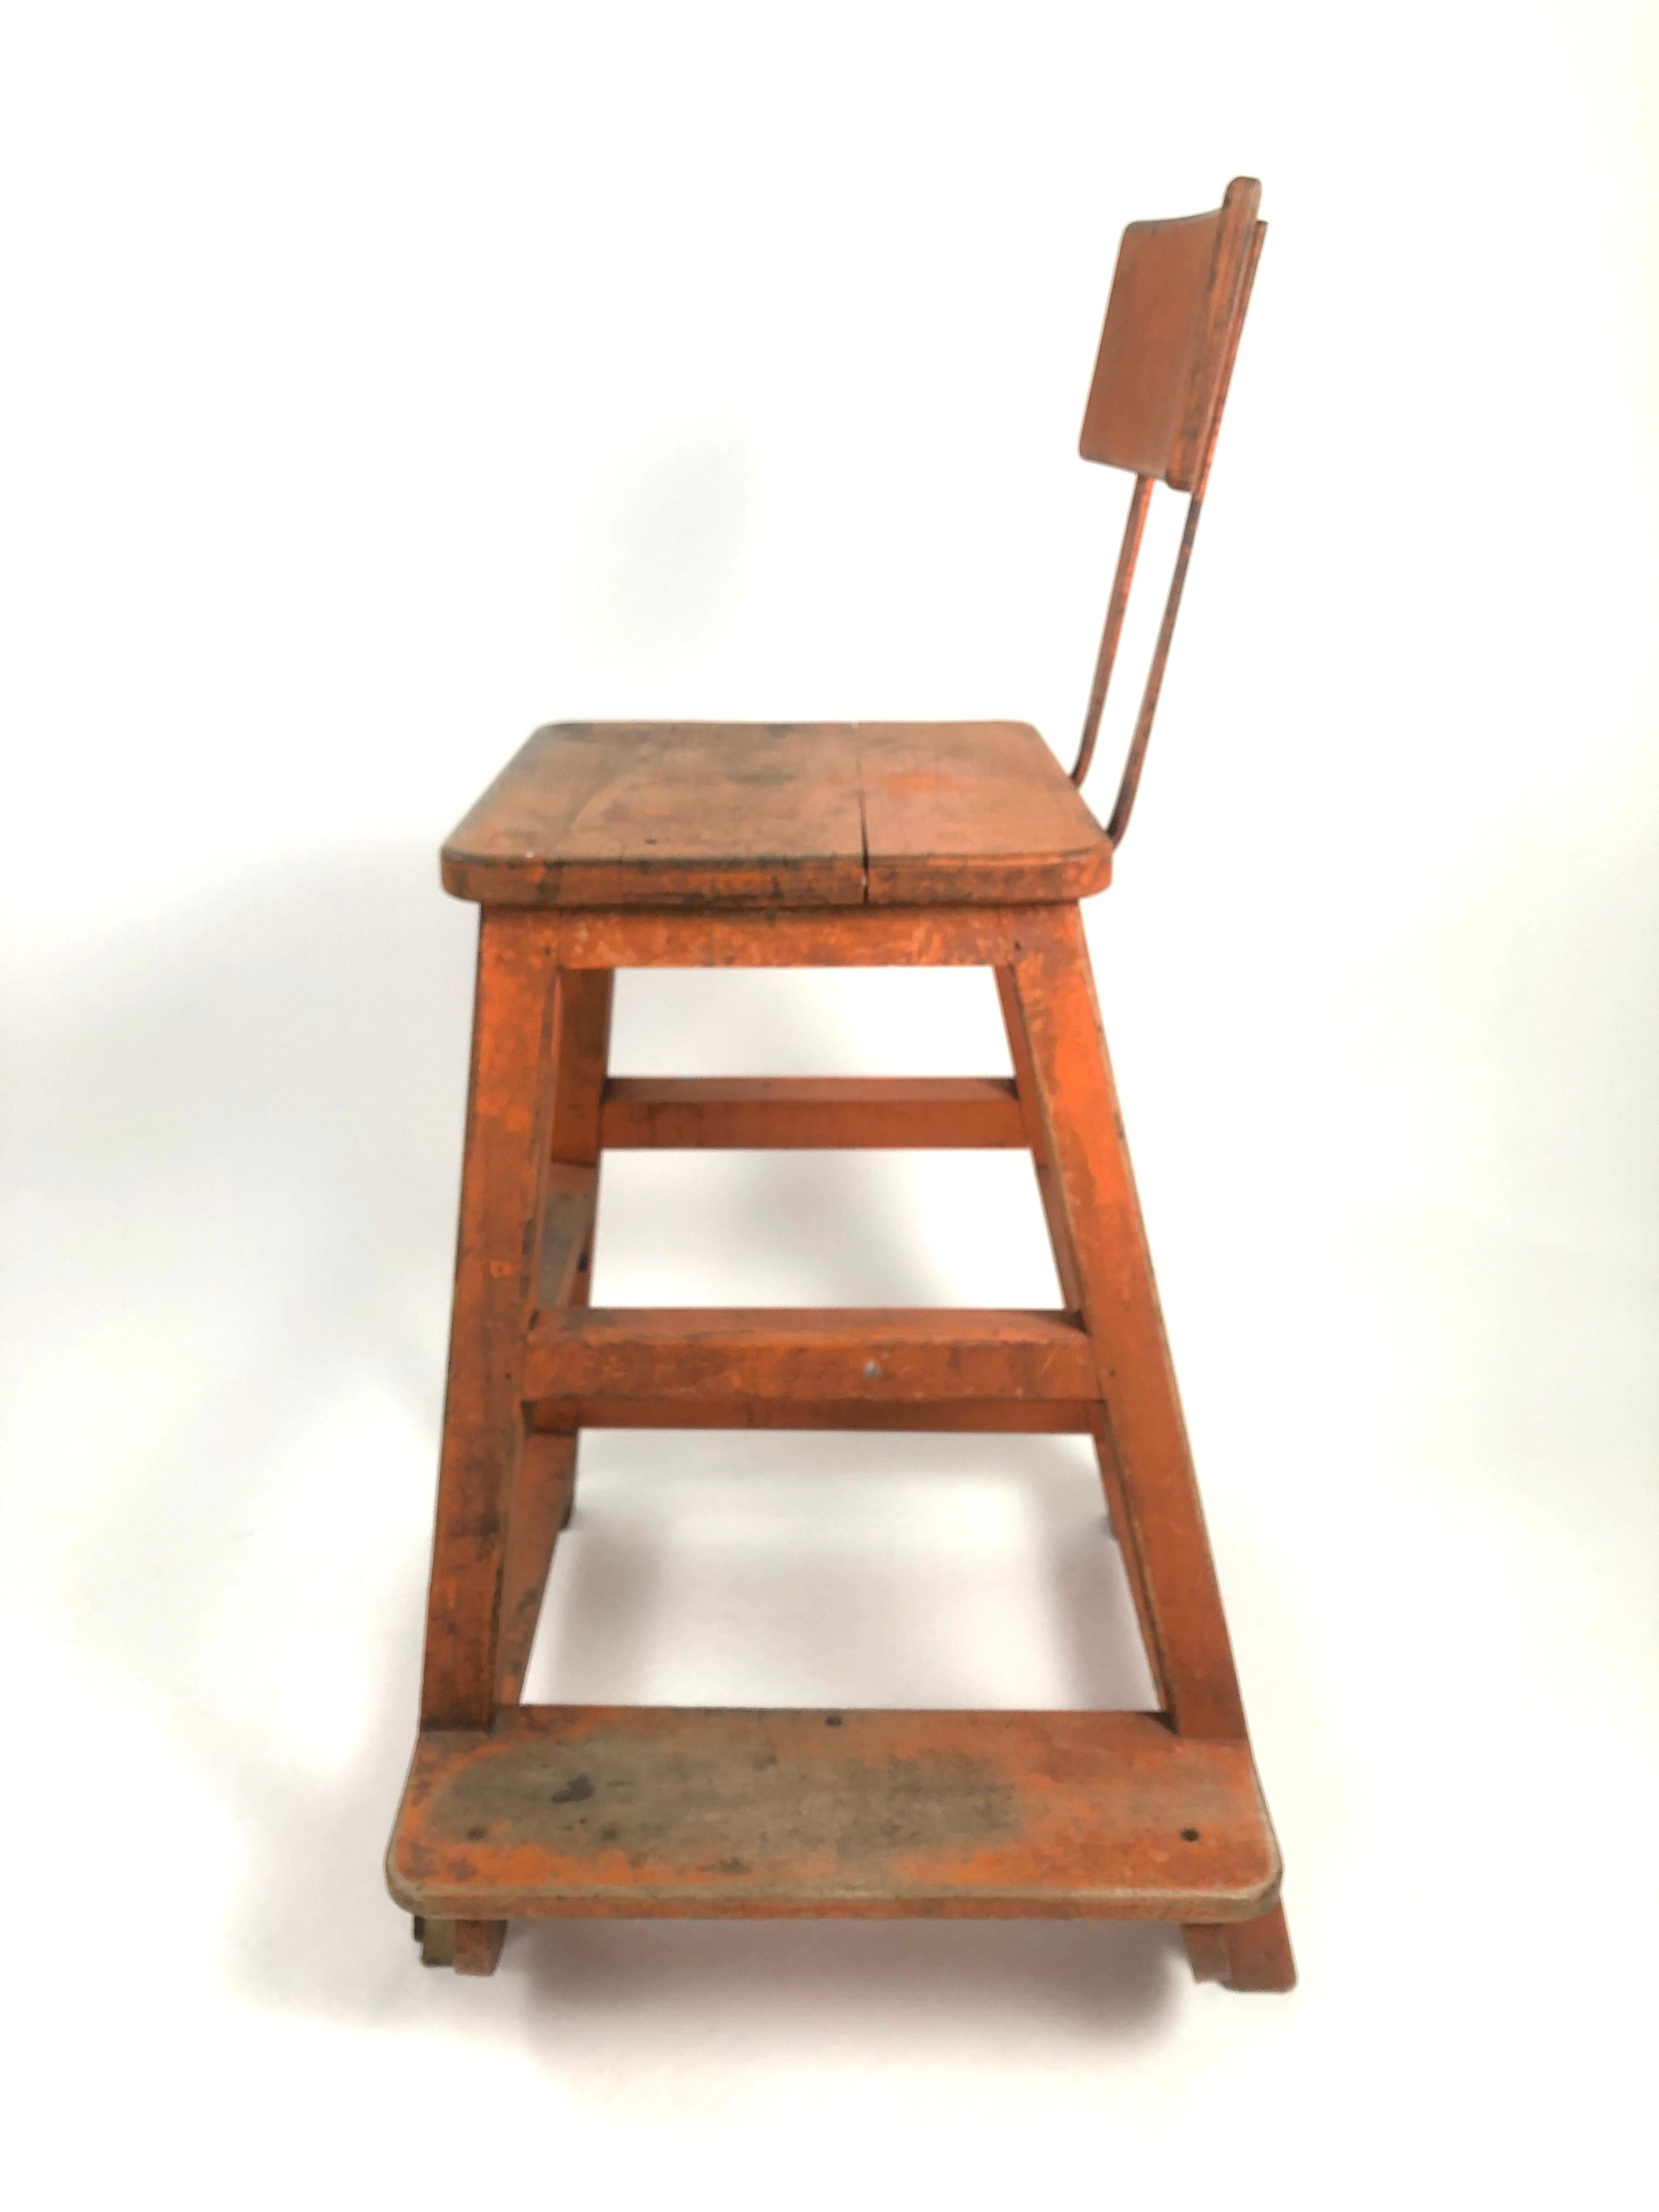 Early 20th Century Orange Painted Wood and Metal Industrial Factory Stool, circa 1920s